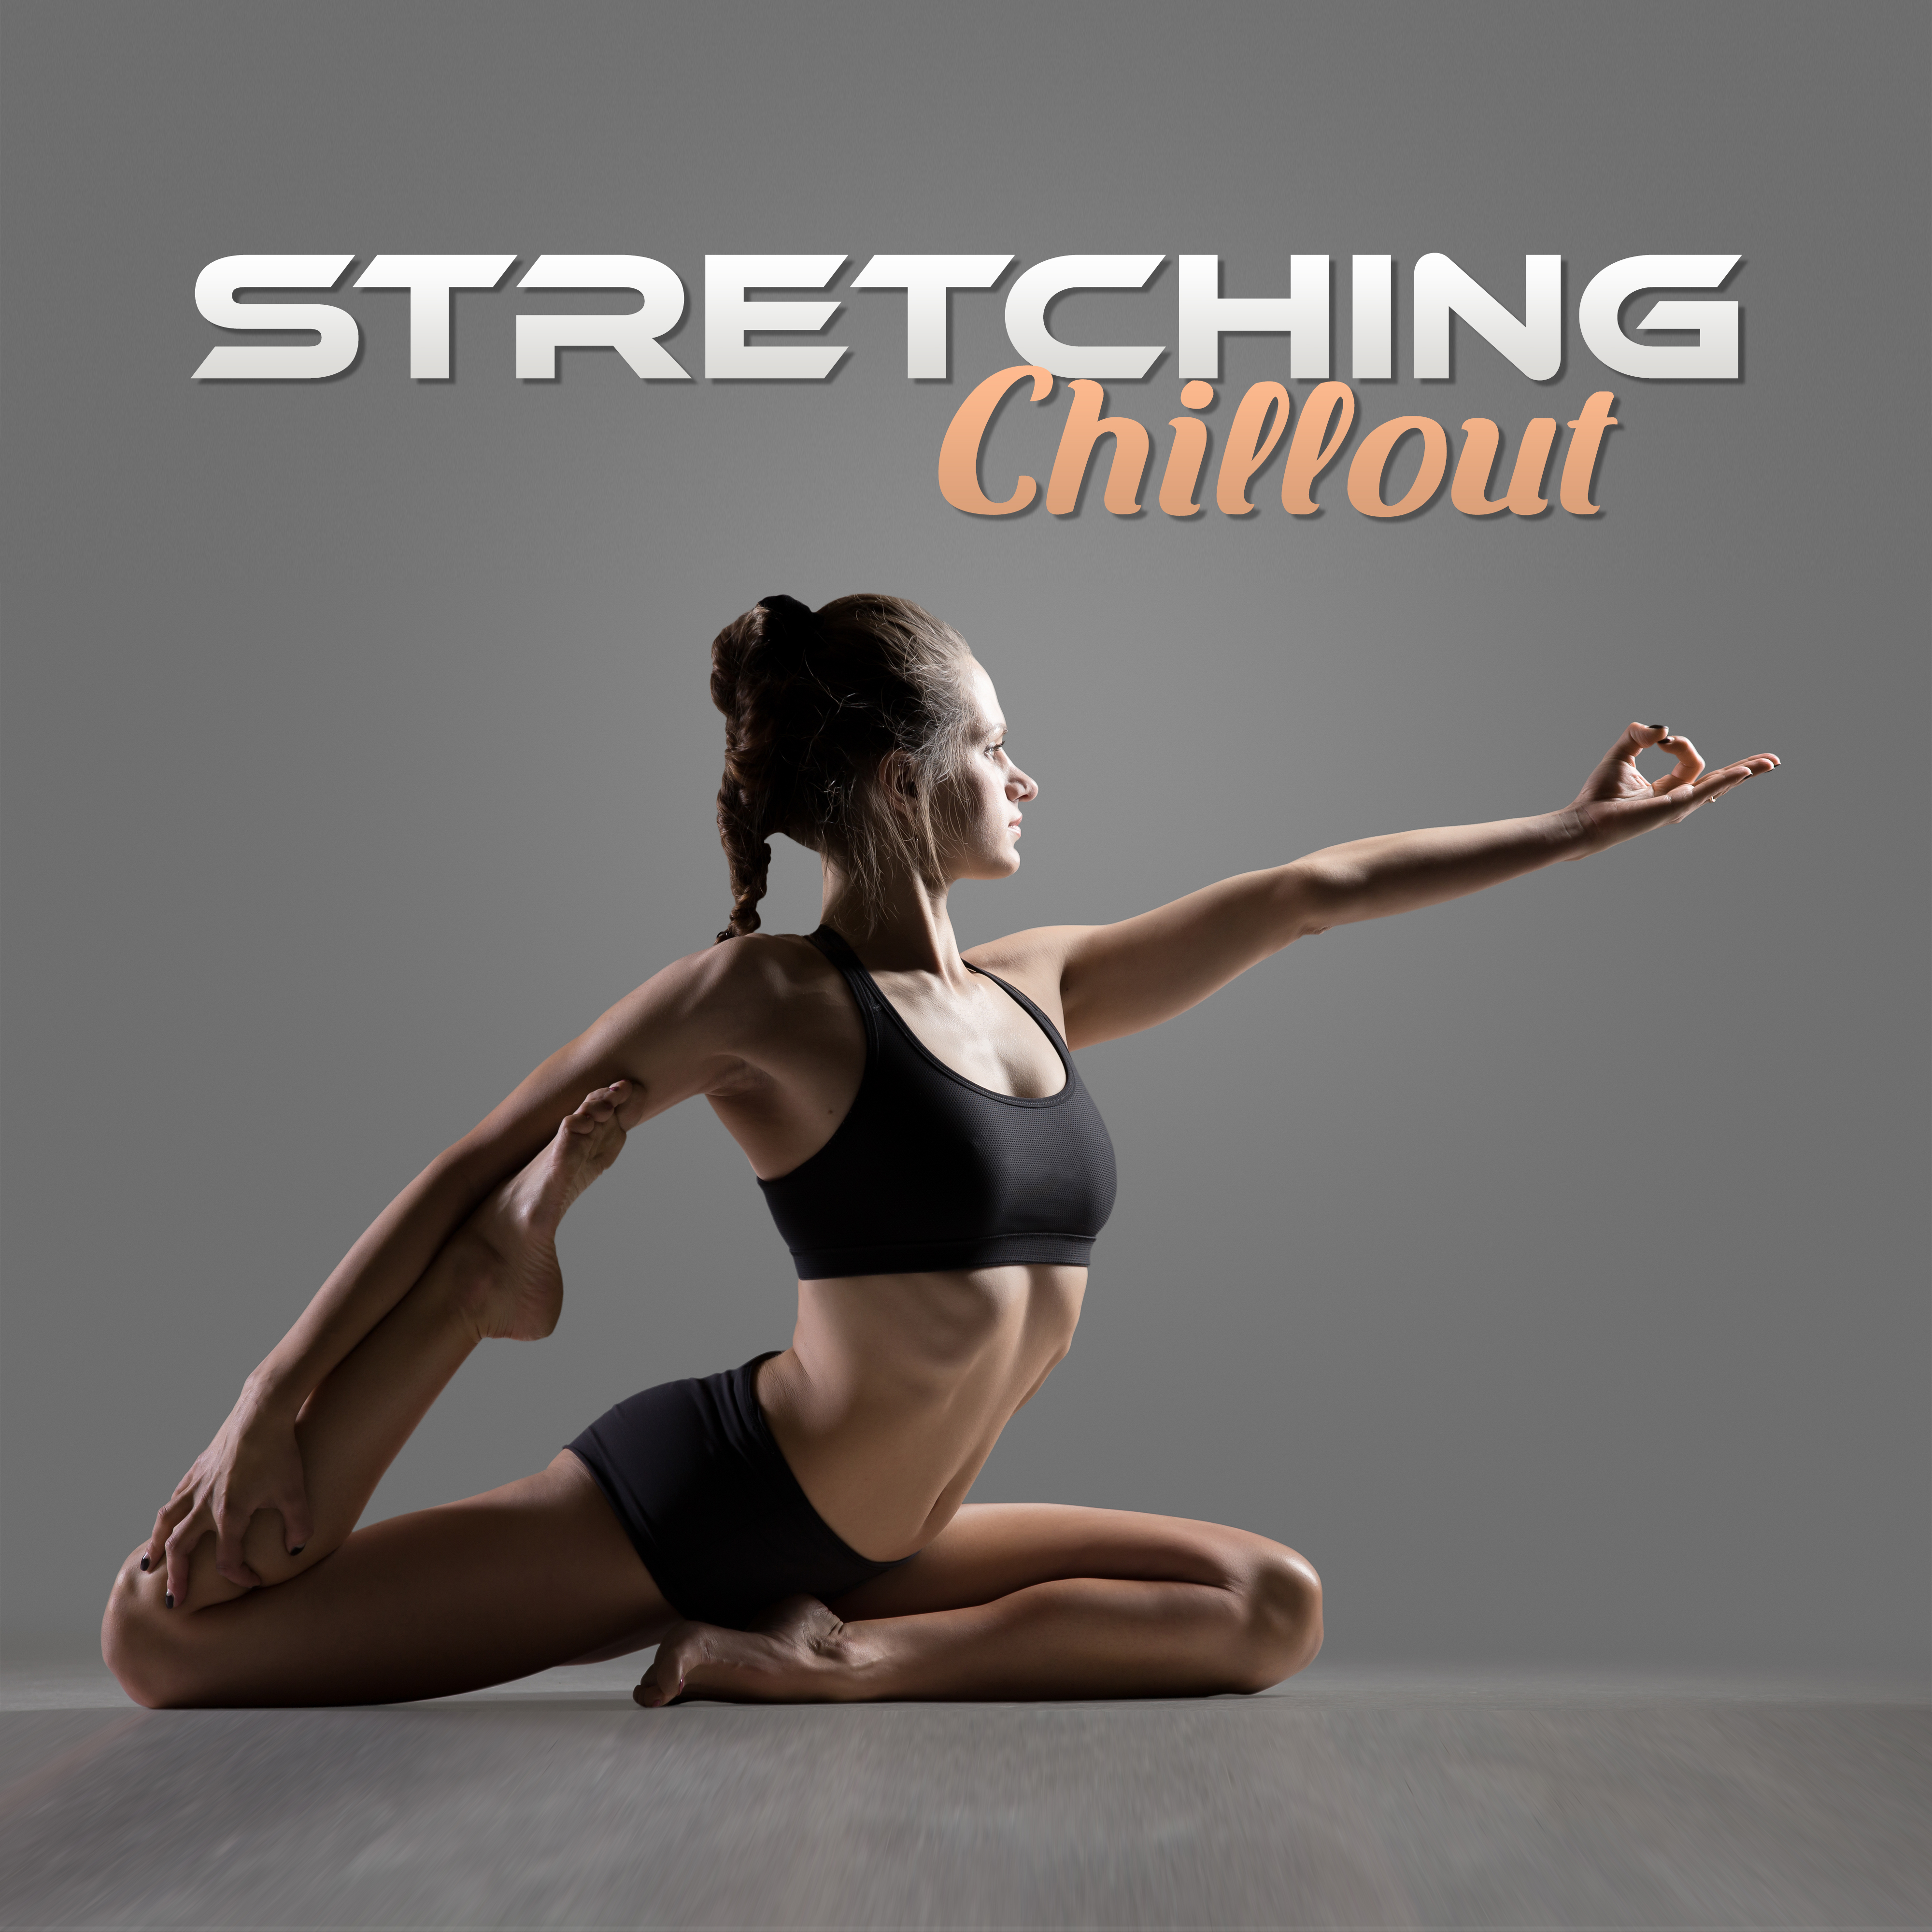 Stretching Chillout